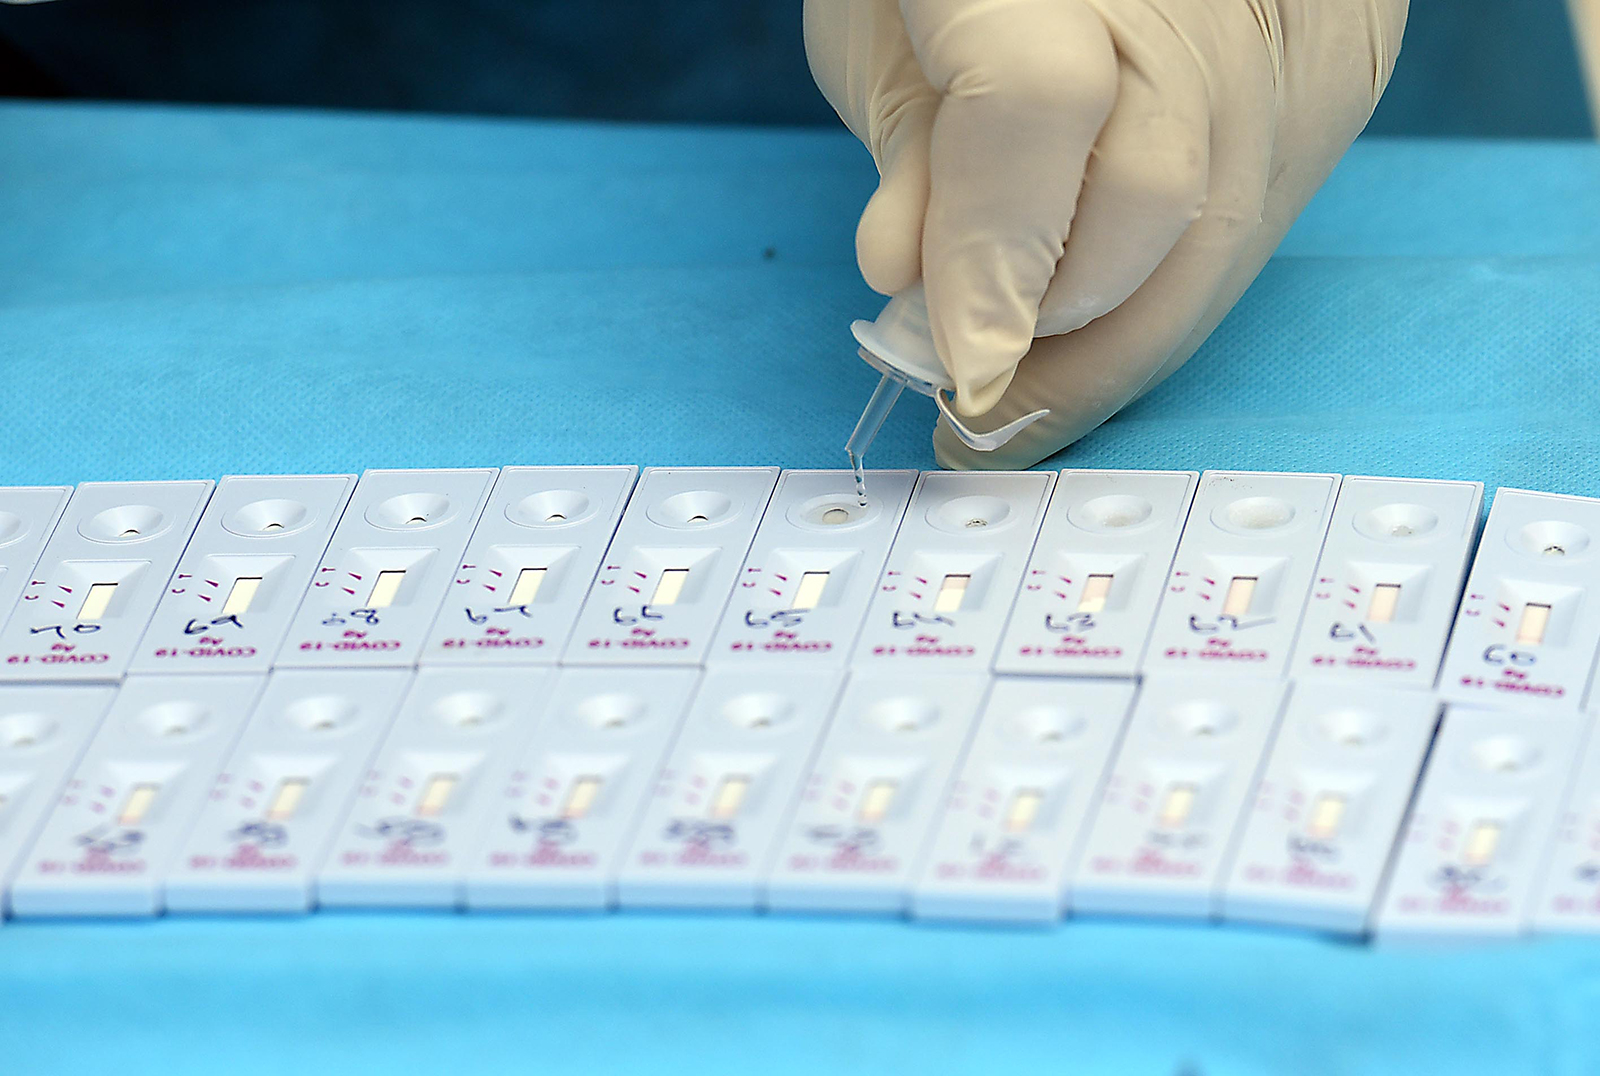 A health worker works with test slides for coronavirus testing at a government office, in New Delhi, on October 27.